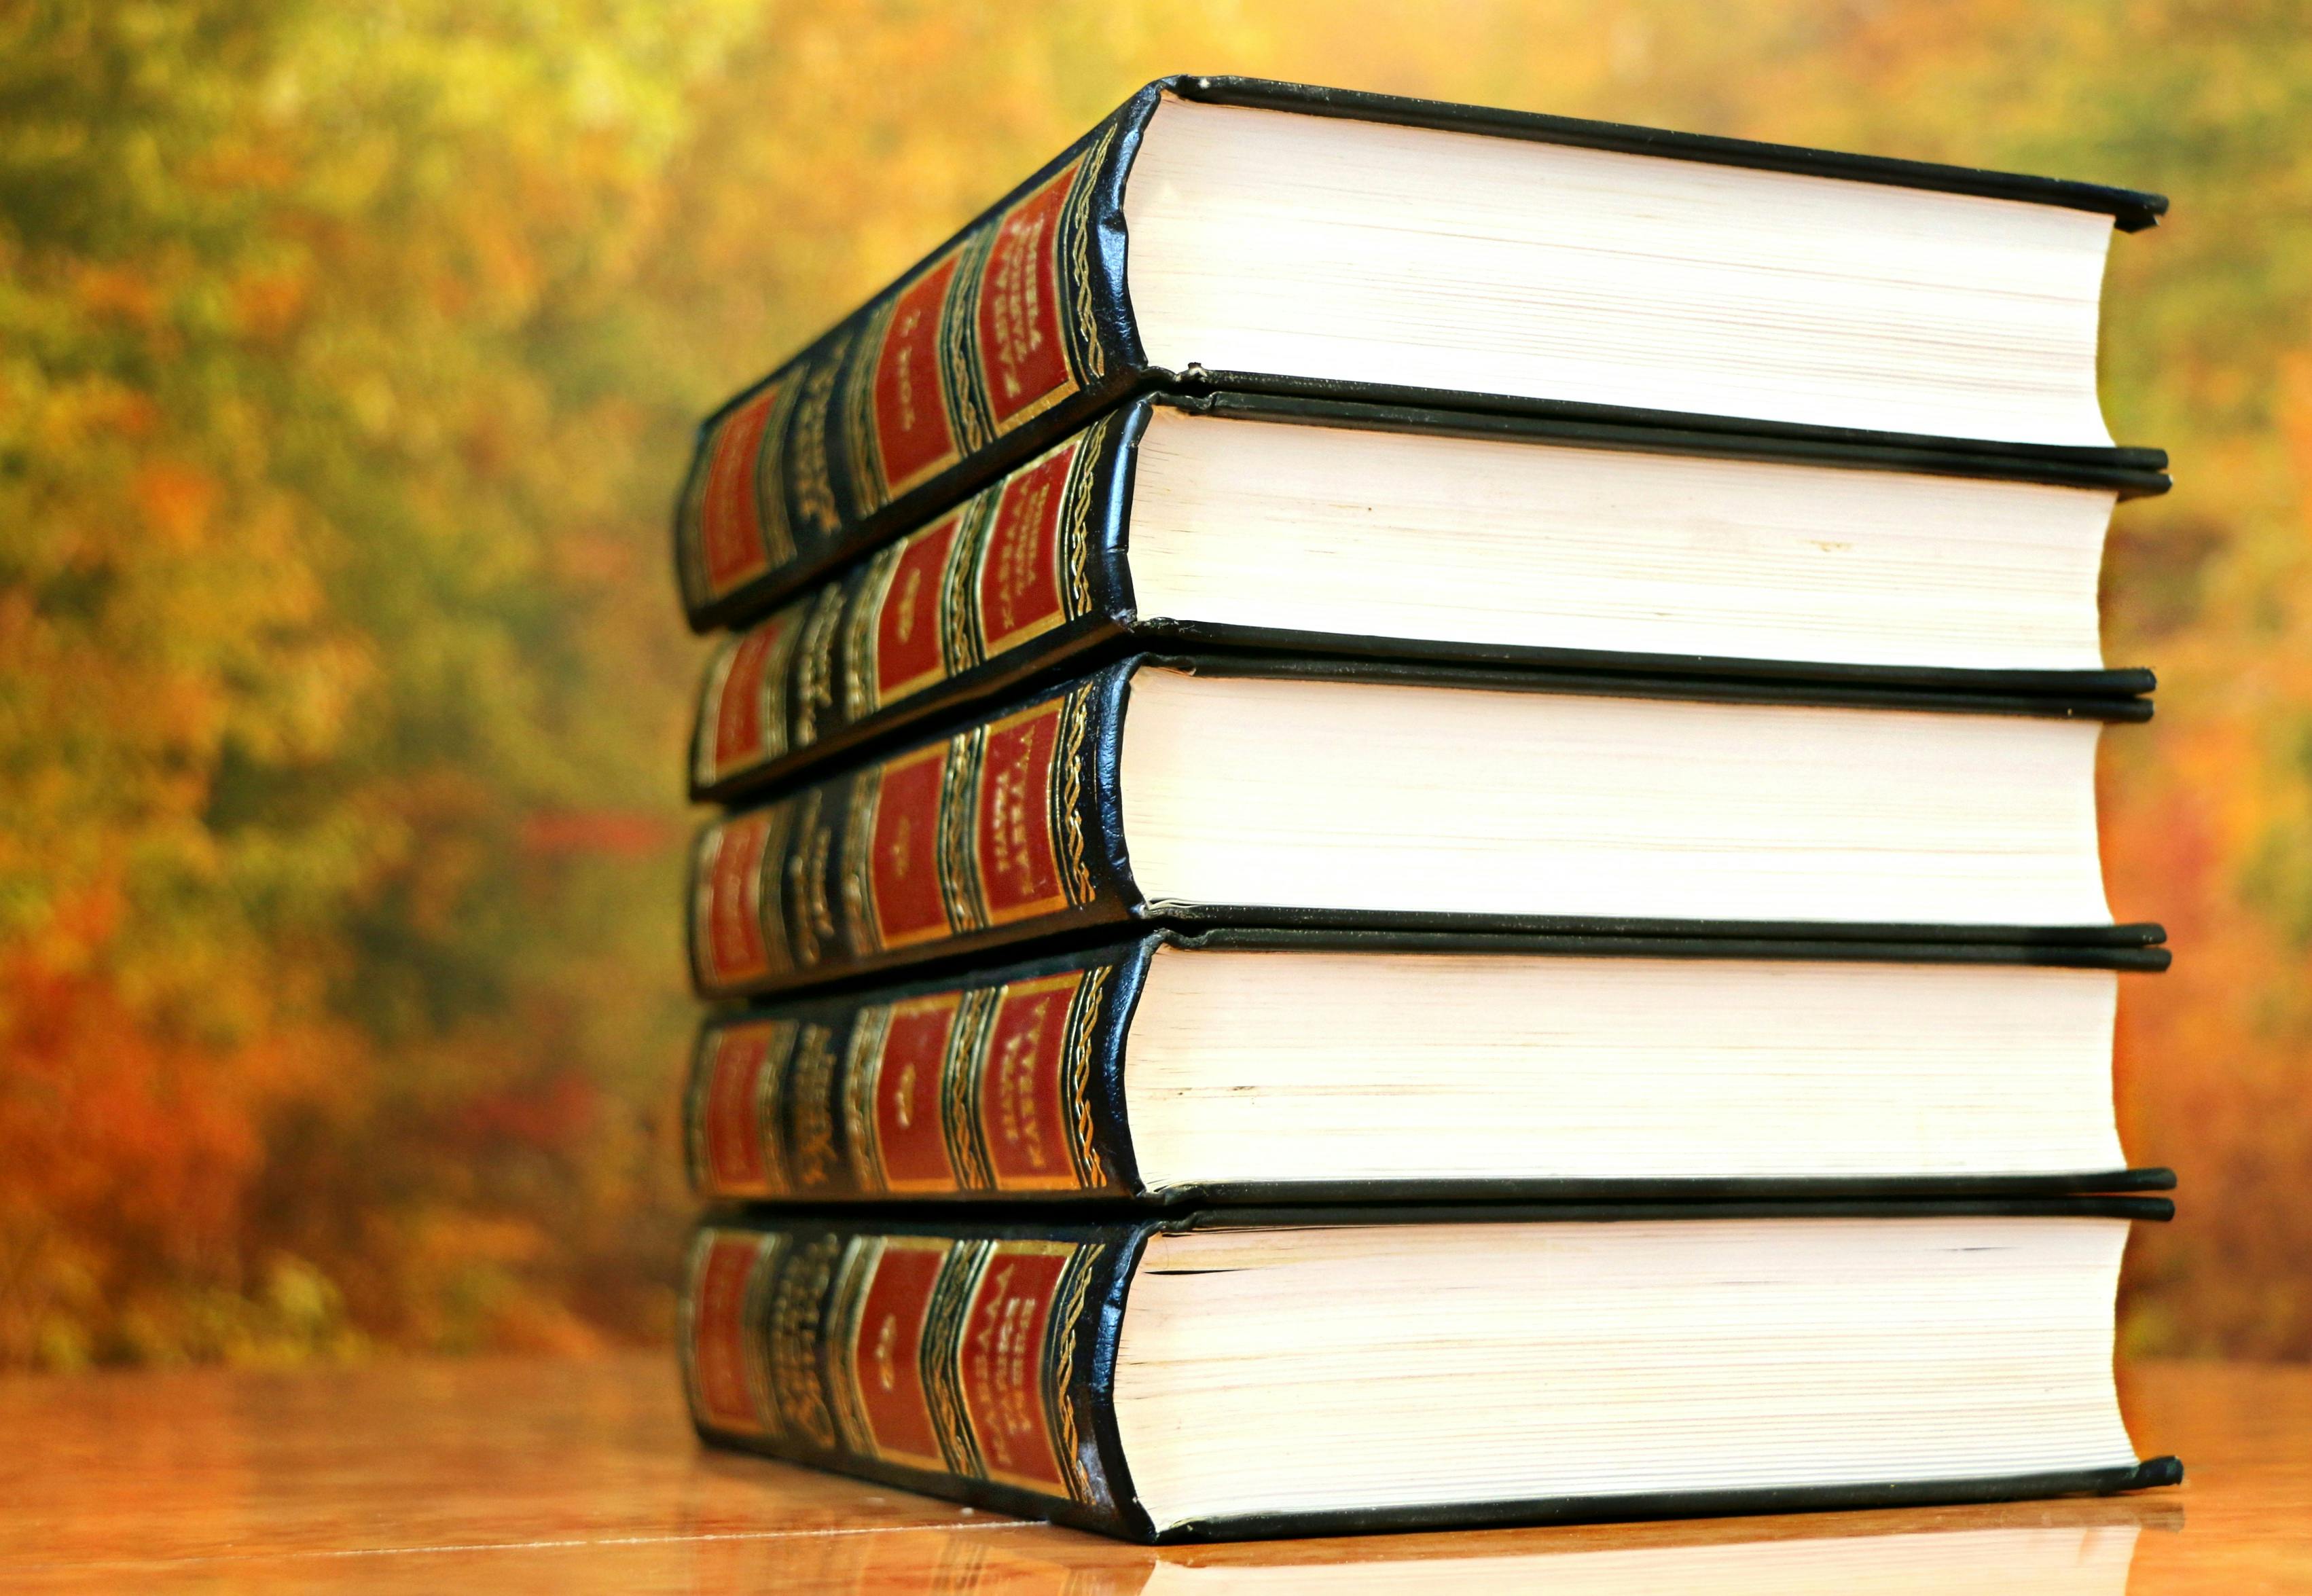 Free stock photo of book stack, books, collection